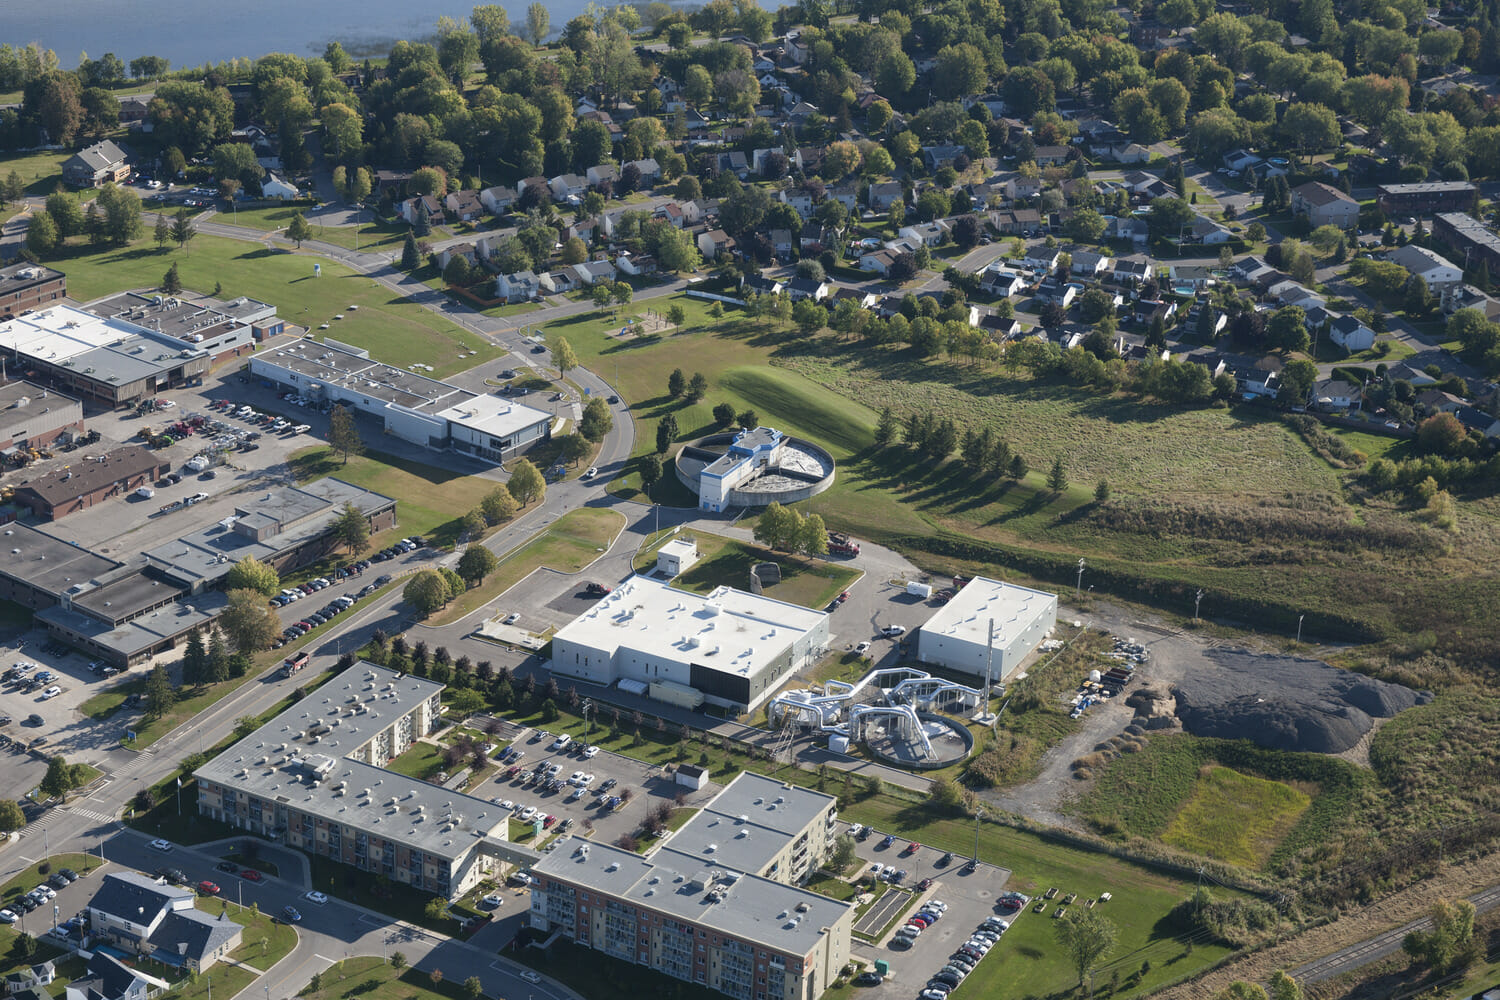 An aerial view of a campus with buildings and trees.